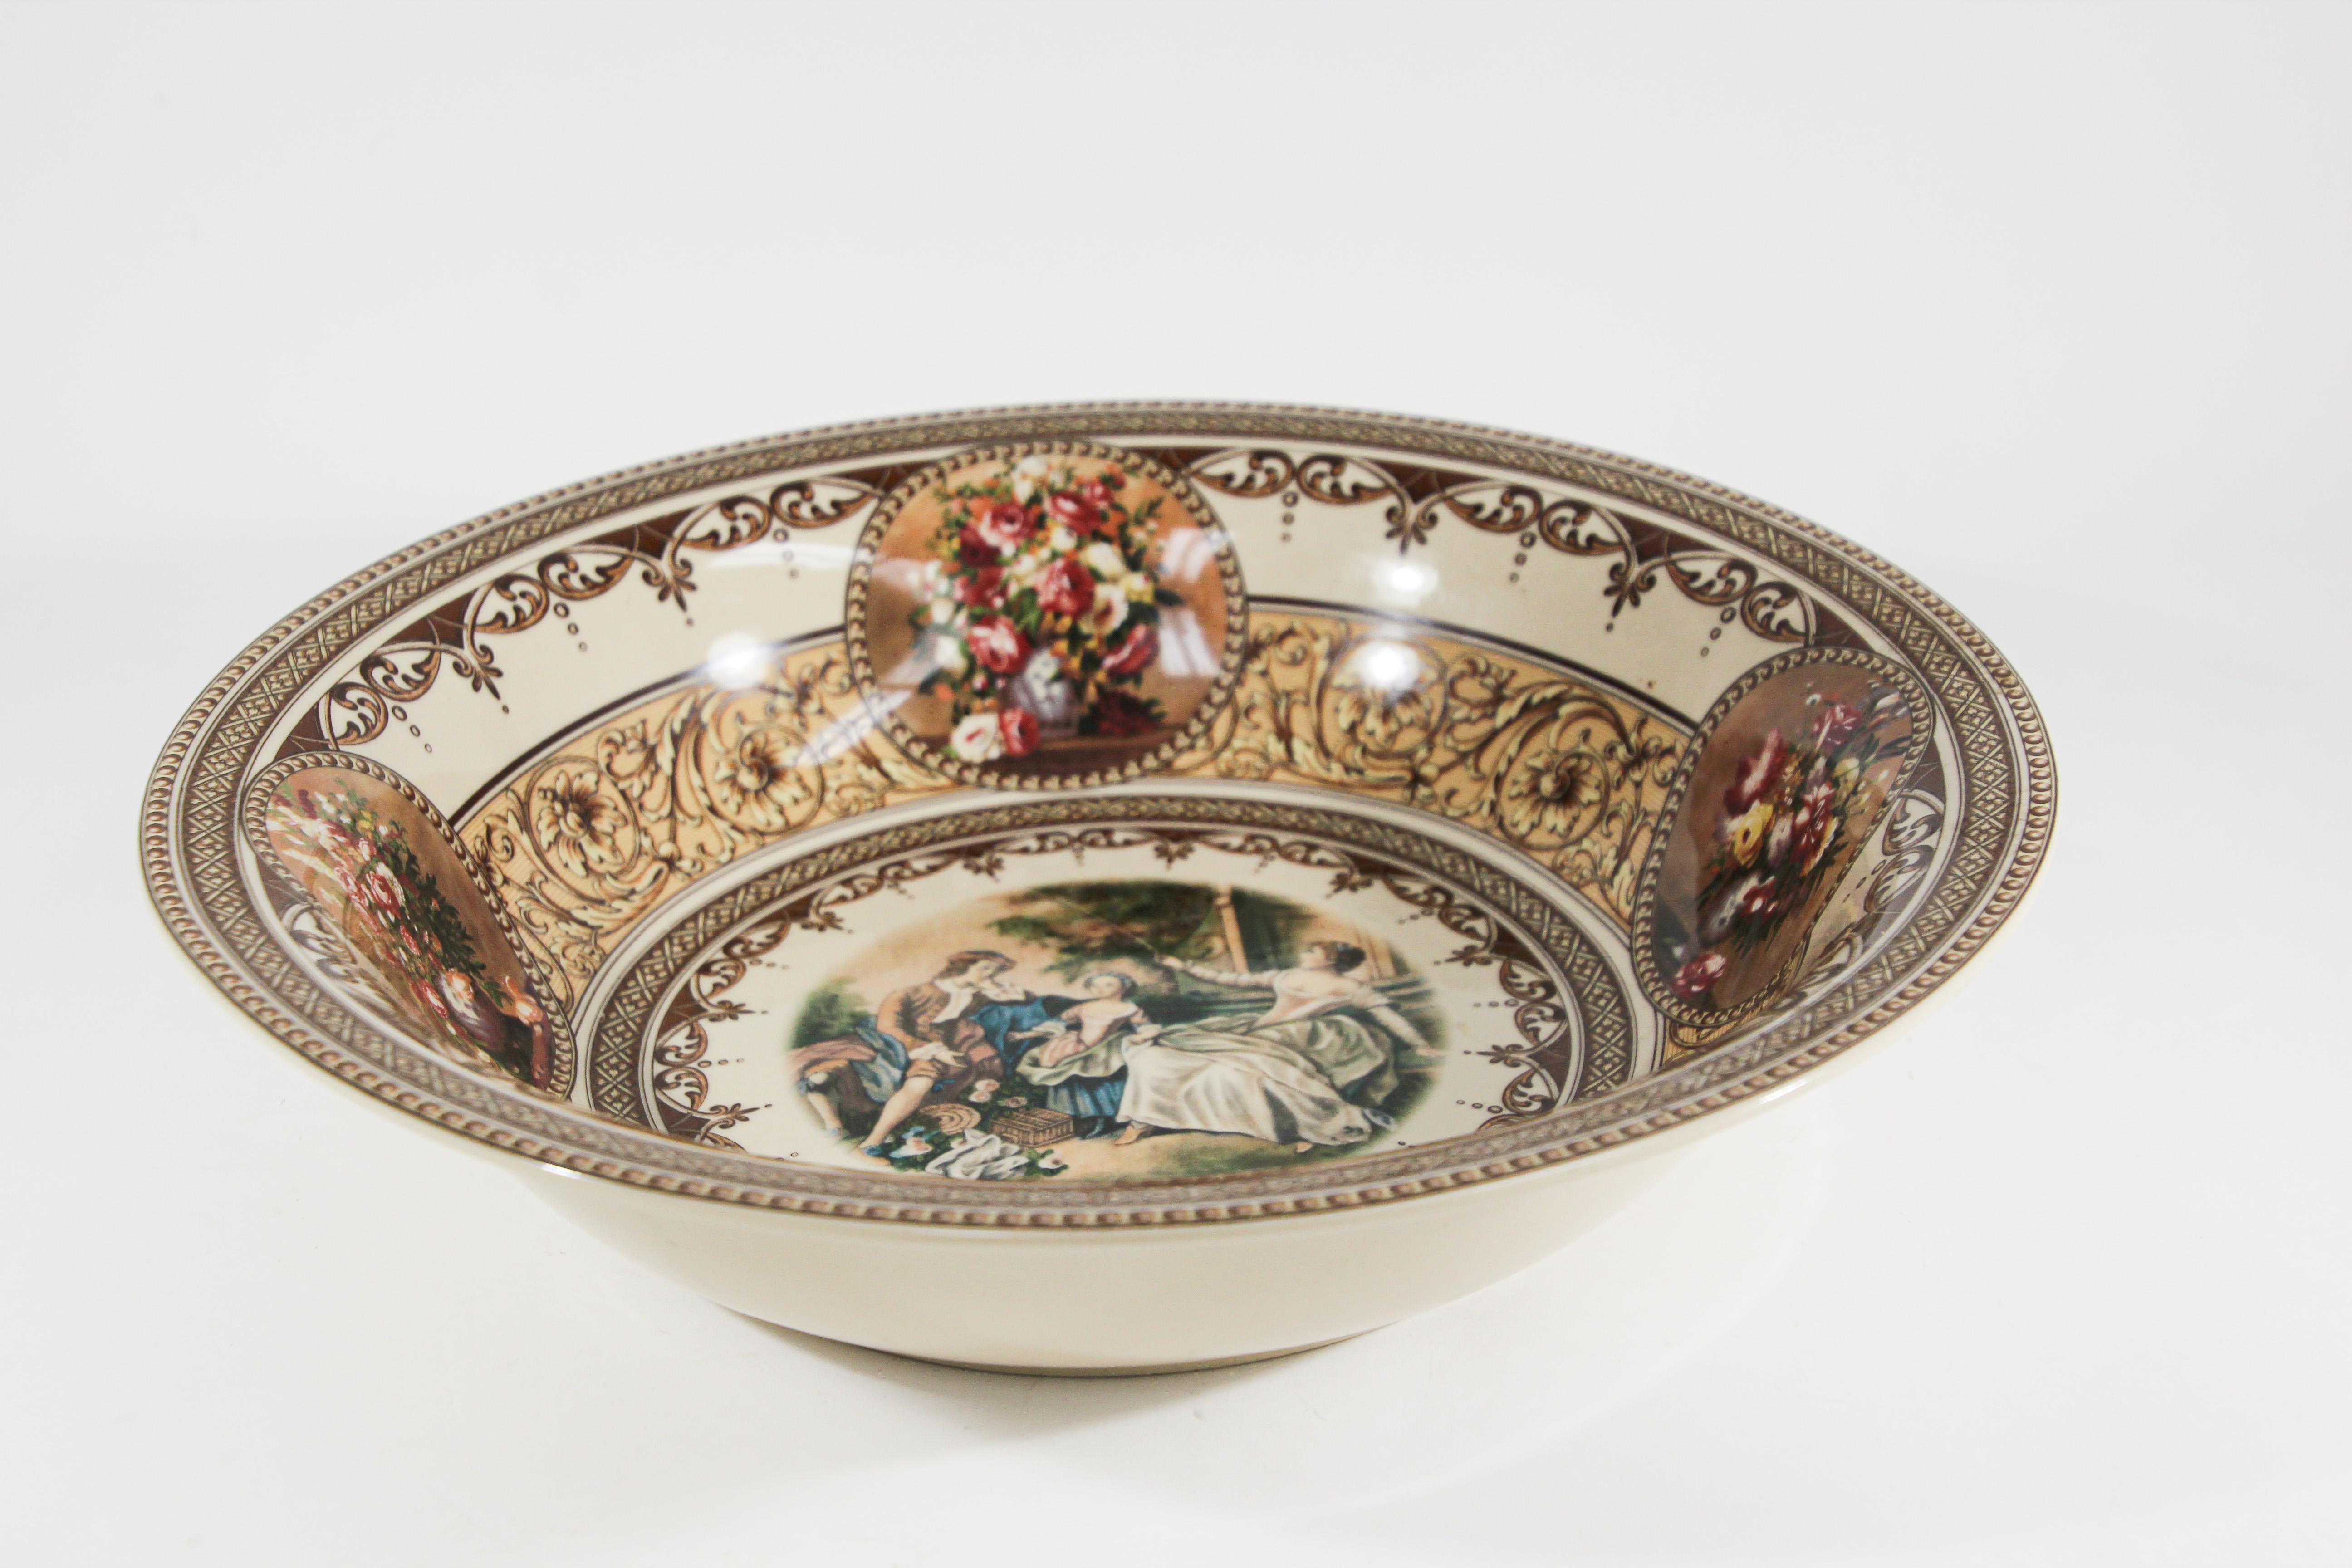 Vintage Limoges large bowl handmade in France collectible porcelain.
If you are a lover of Limoges, this bowl is the perfect addition to your collection.
This beautiful bowl is hand painted with beautiful tones of brown and yellow and includes